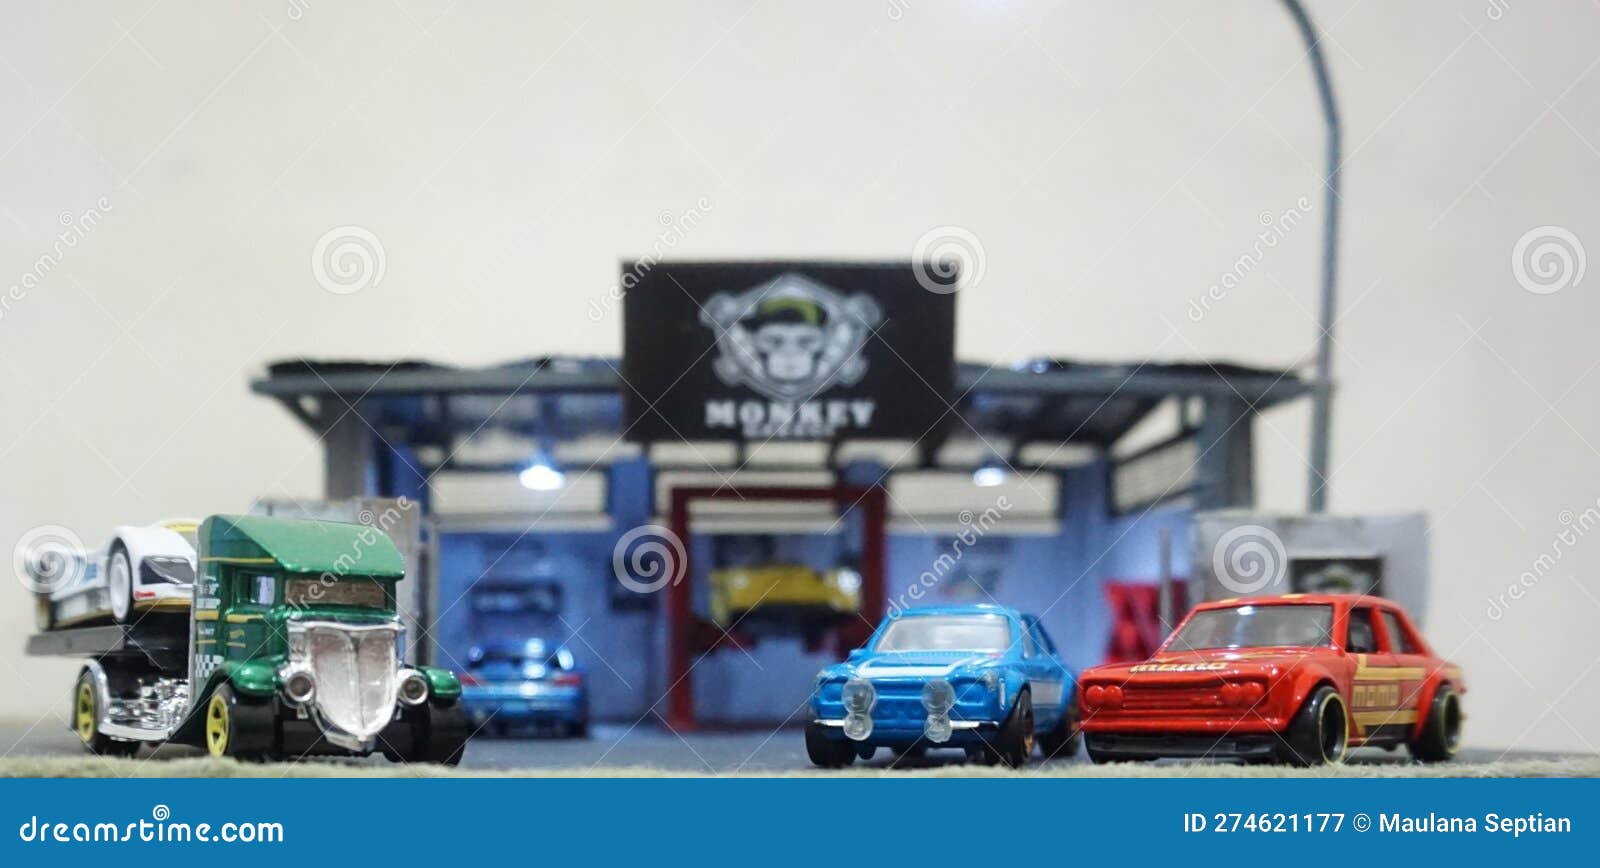 https://thumbs.dreamstime.com/z/photo-toy-car-collection-front-workshop-diorama-toys-photography-garage-several-cars-274621177.jpg